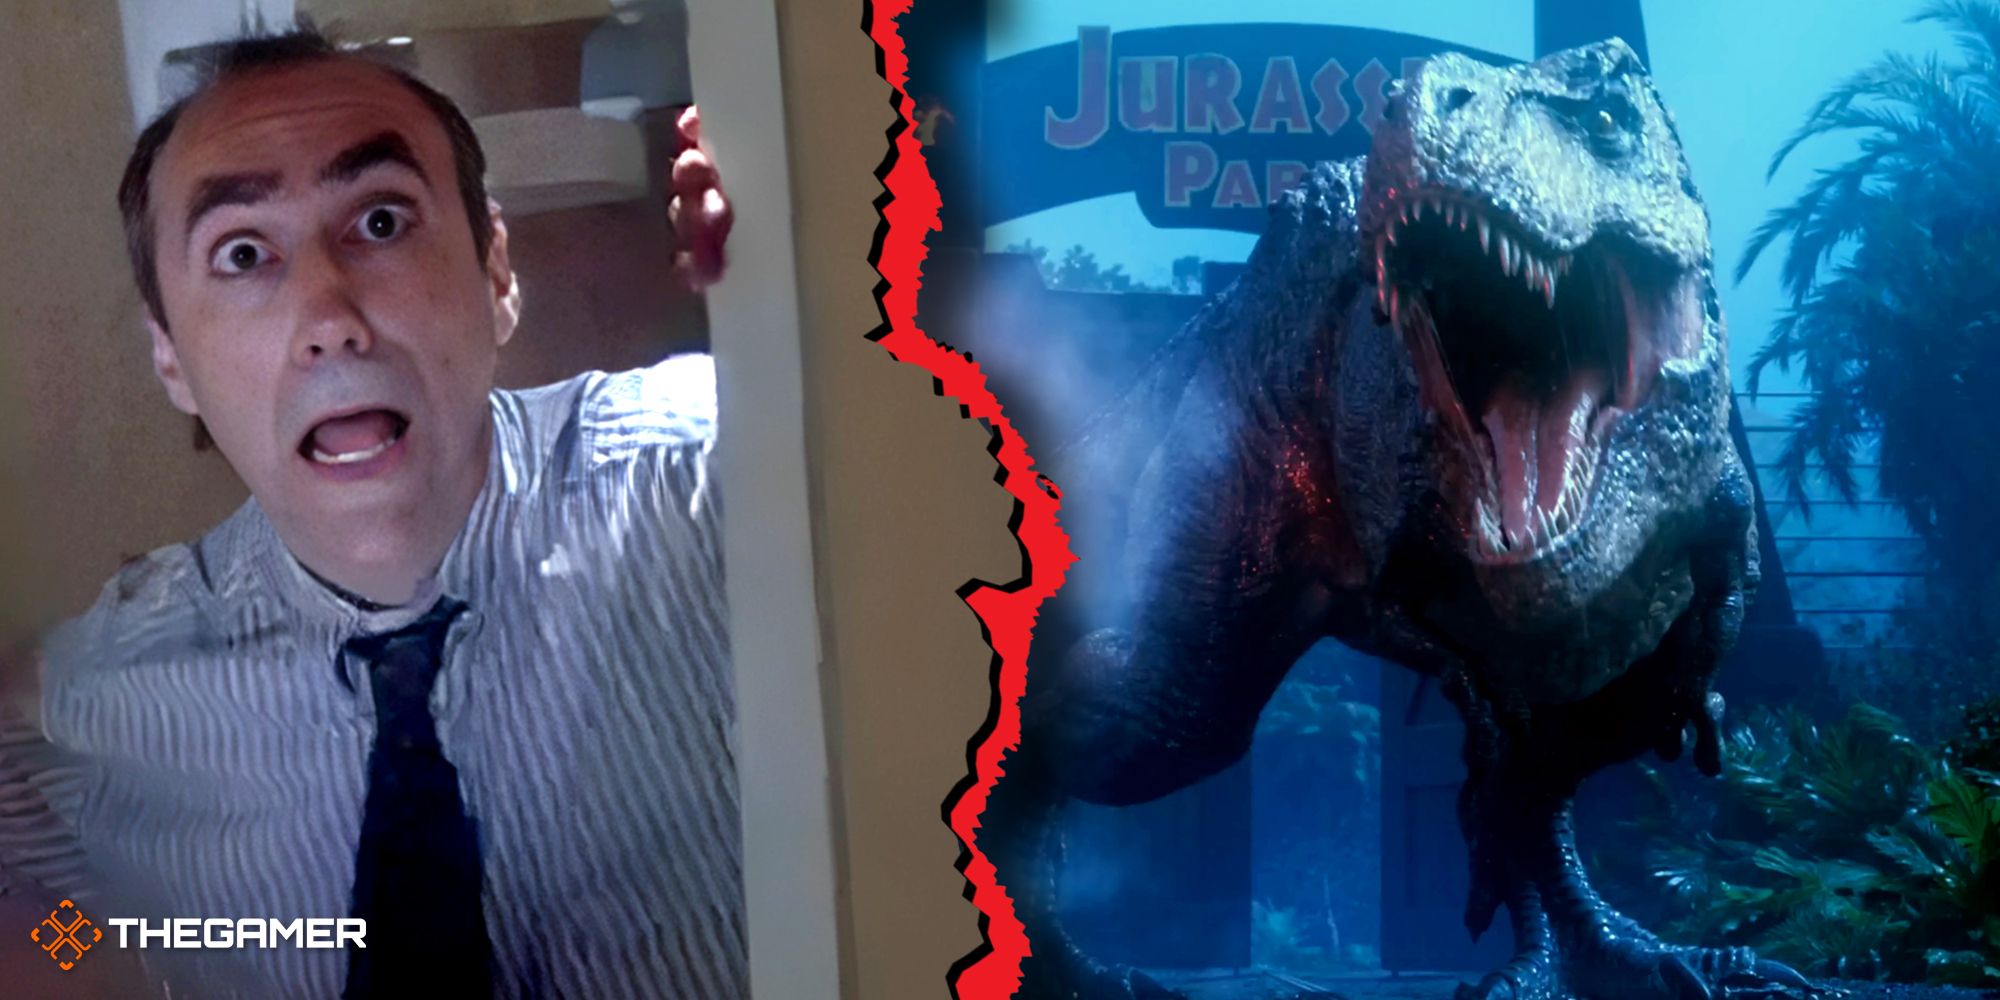 The Lawyer from Jurassic Park the the roaring T-Rex from Jurassic Park Survival